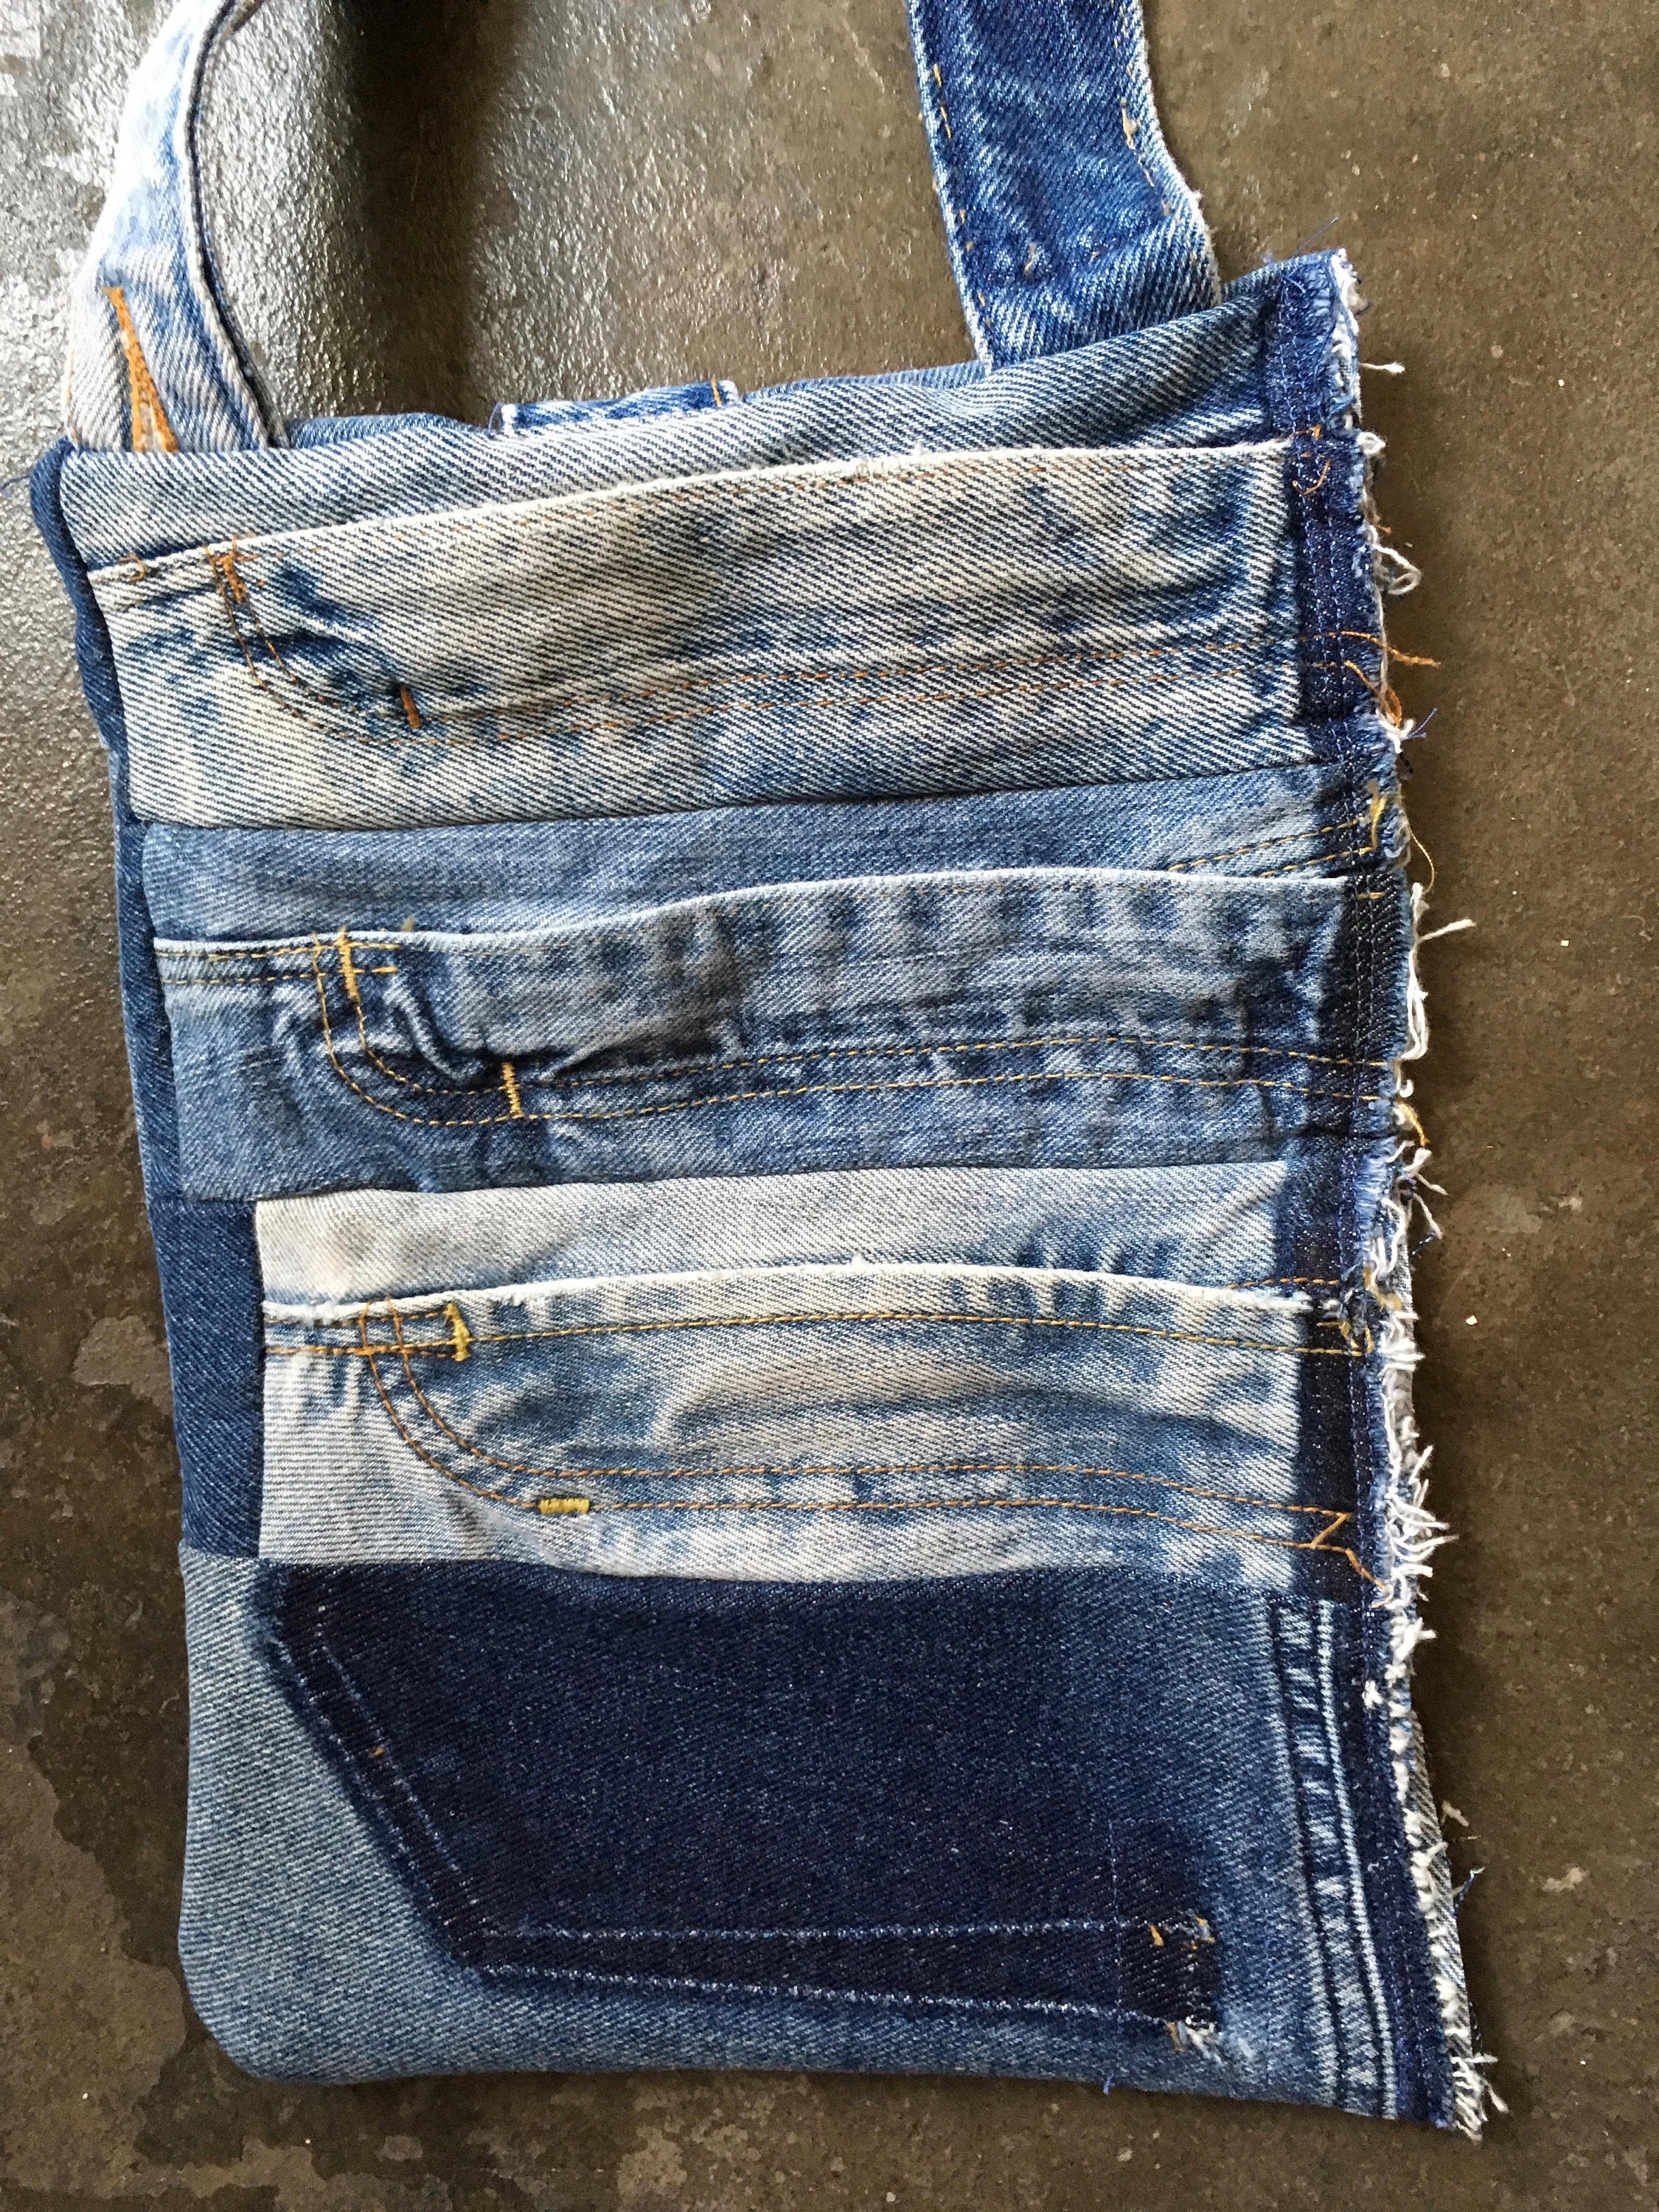 Three Zip Pockets Recycled Jeans Bag - Etsy